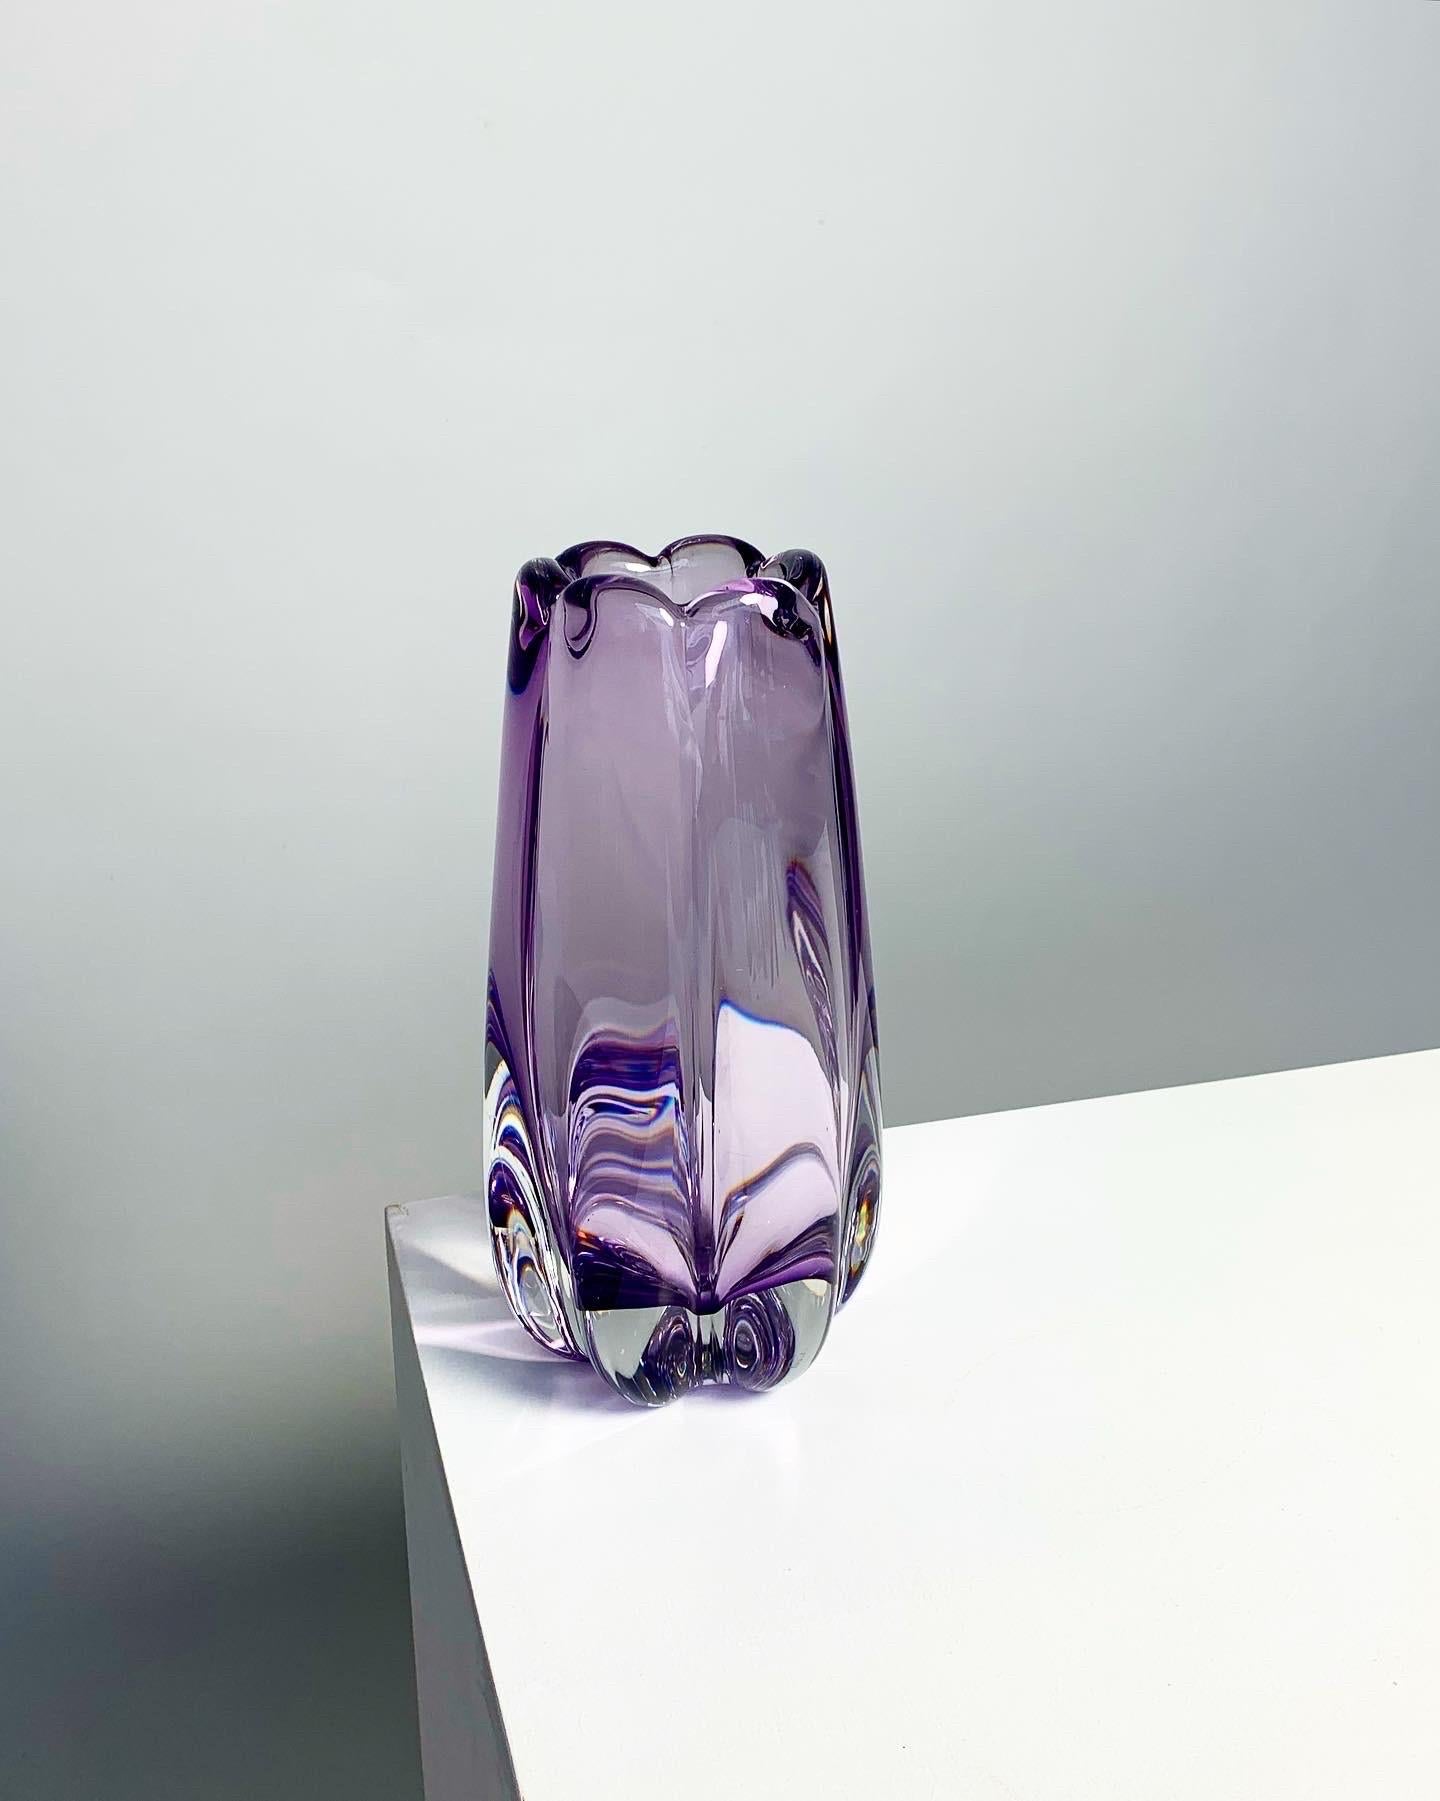 Early crystal glass vase by Swedish designer Elis Bergh, mouth-blown and hand-shaped by Kosta glassworks in Sweden in the 1940s.

Signed with the model number underneath „B2566“

Height: 24 cm
Diameter: 10 cm